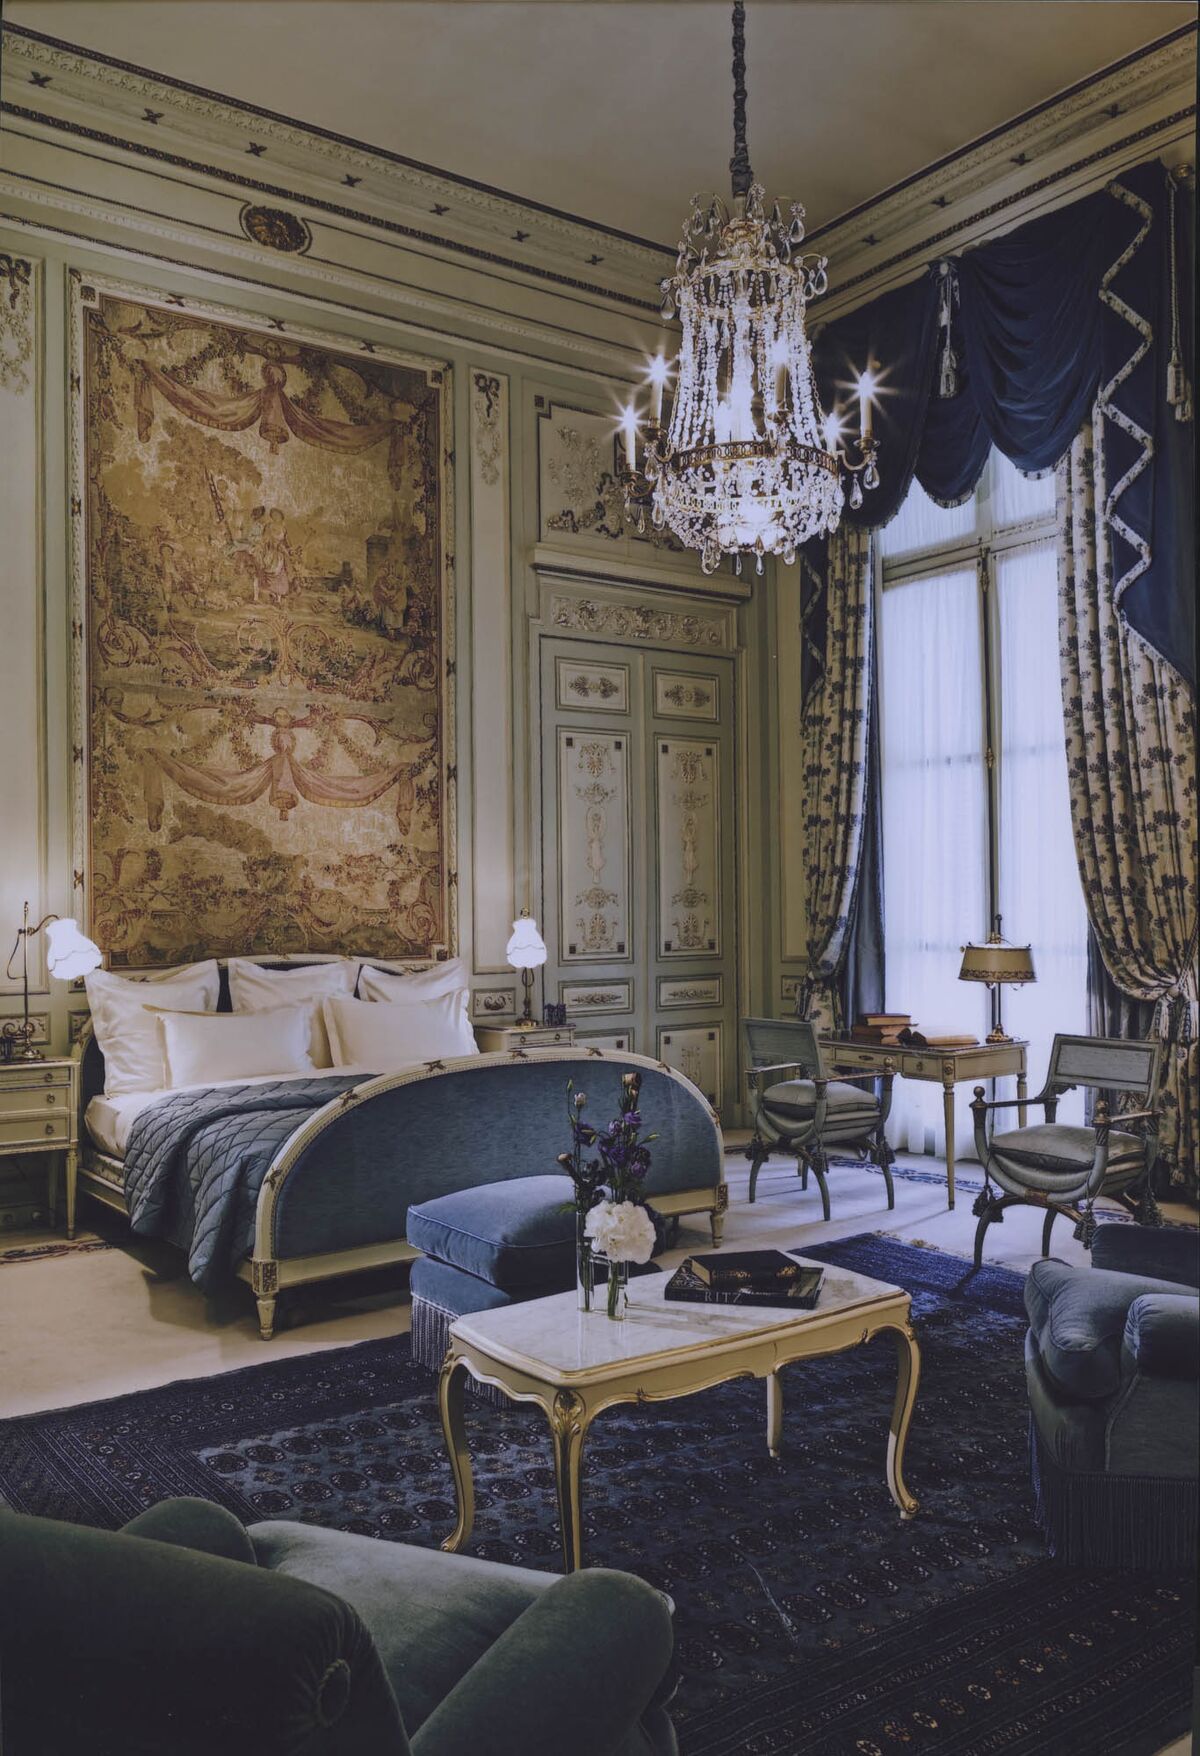 The amazing auction of Ritz Paris world - The Hotel Trotter